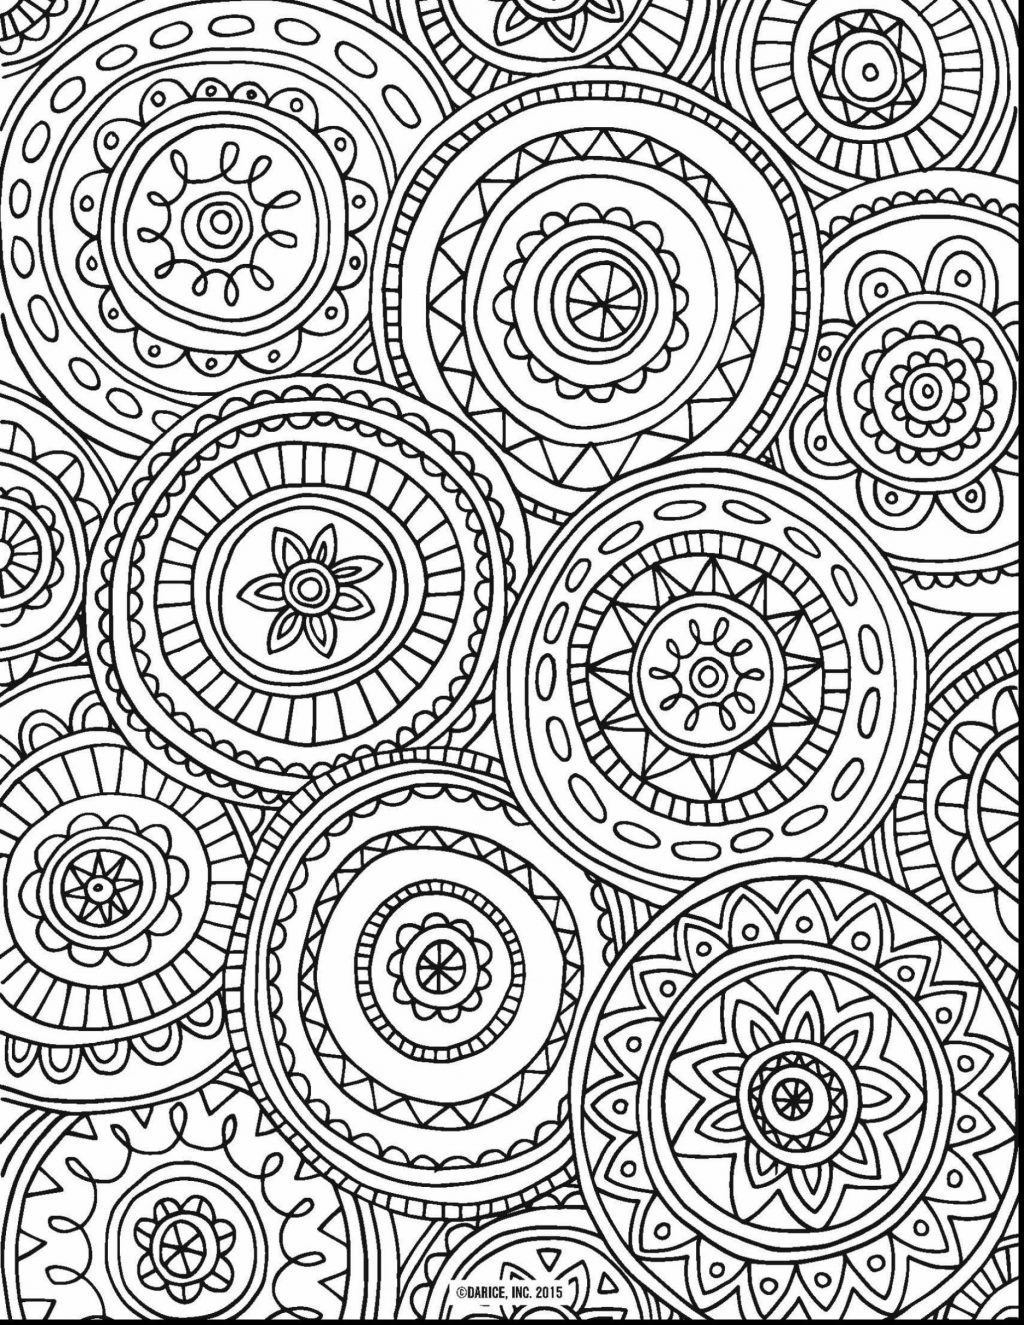 Story Coloring Pages Coloring Pages Printable Mandala Coloring Pages For Adults Toy